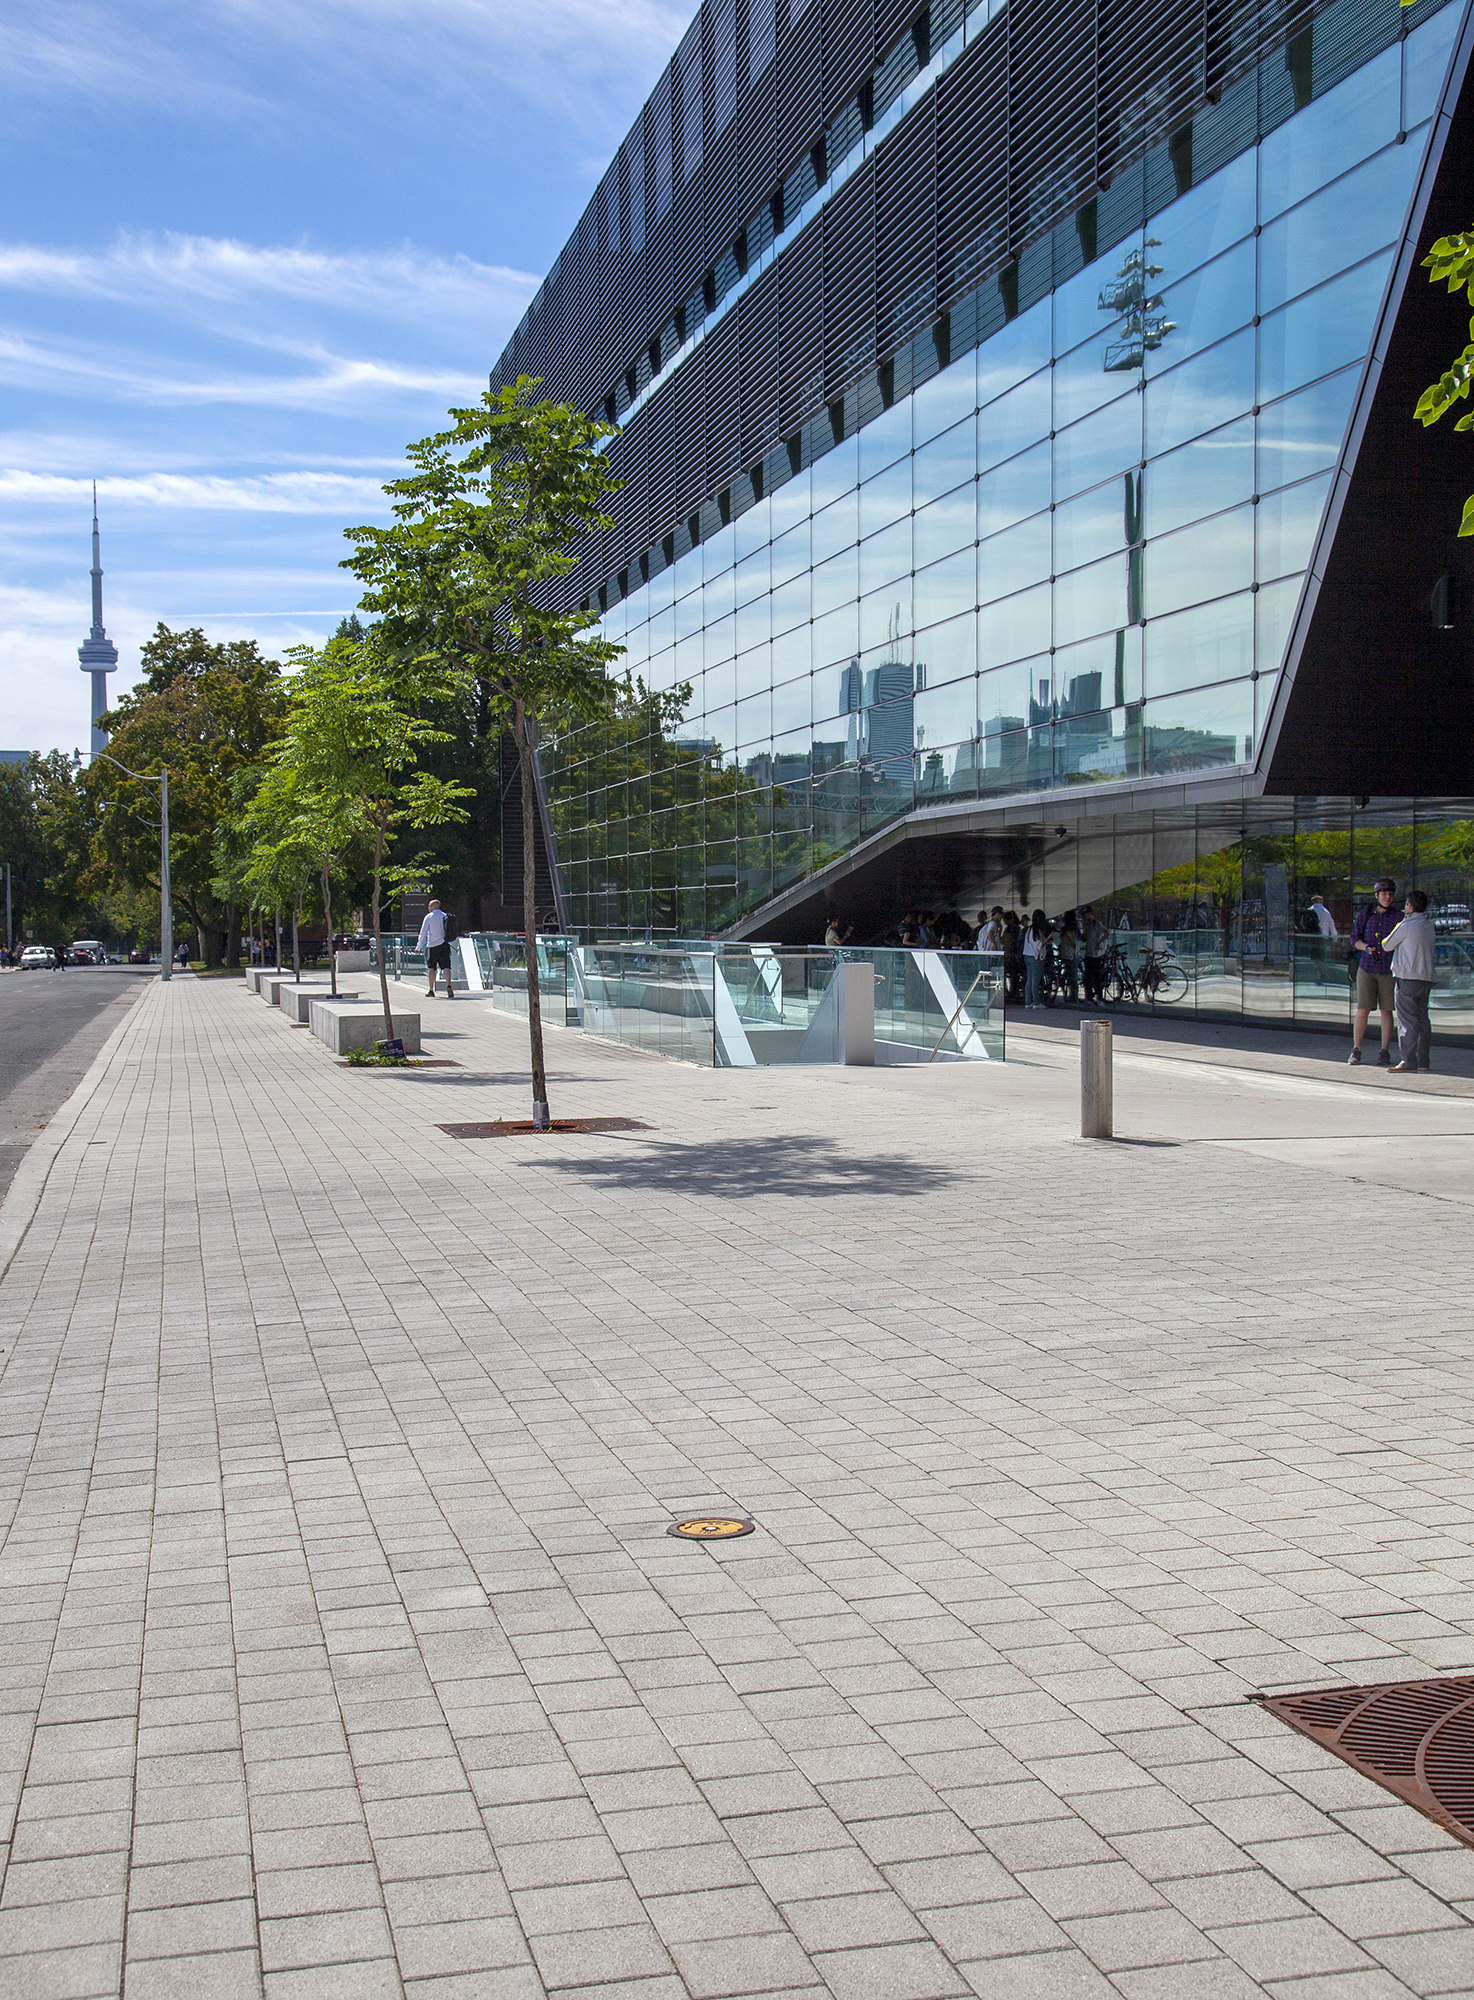 Muted Eco-Optiloc pavers elevate the visual appeal of nearby trees and the glass architecture of the student center.